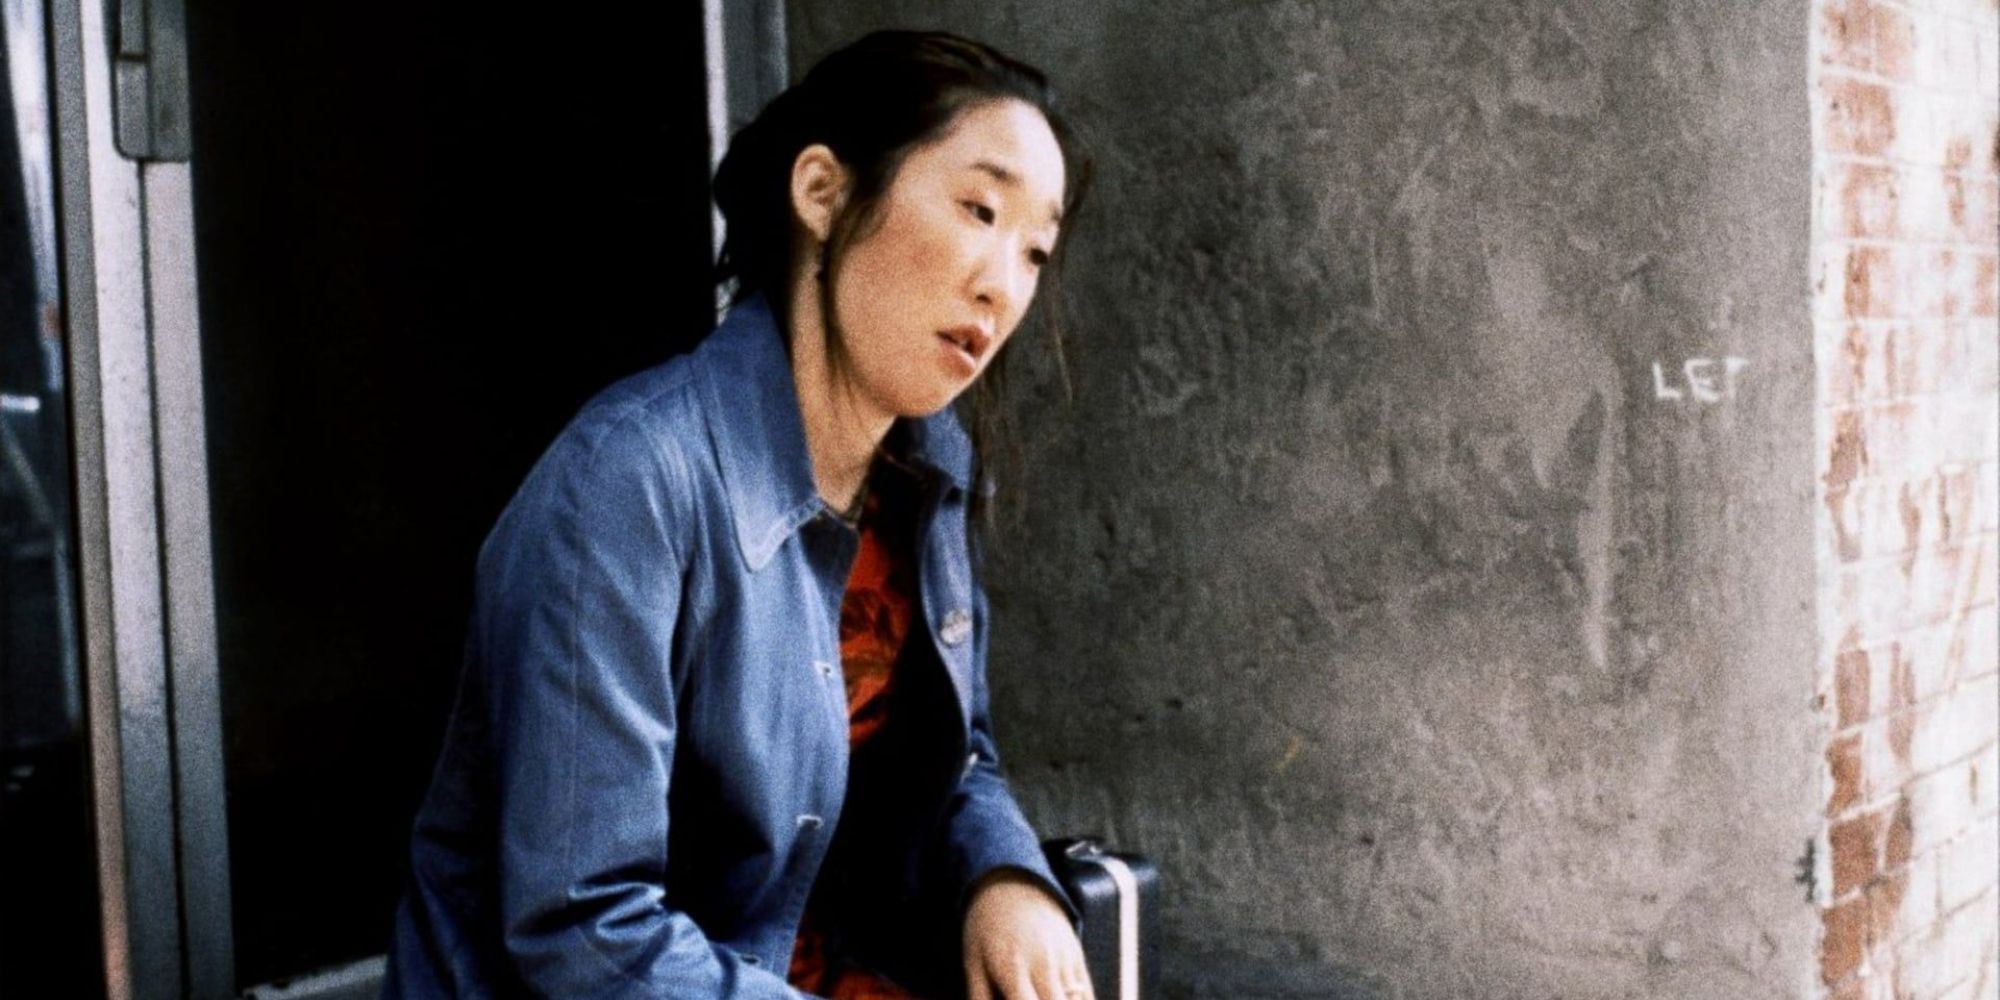 Sandra Oh's character sits on the stoop, looking exhausted in Last Night